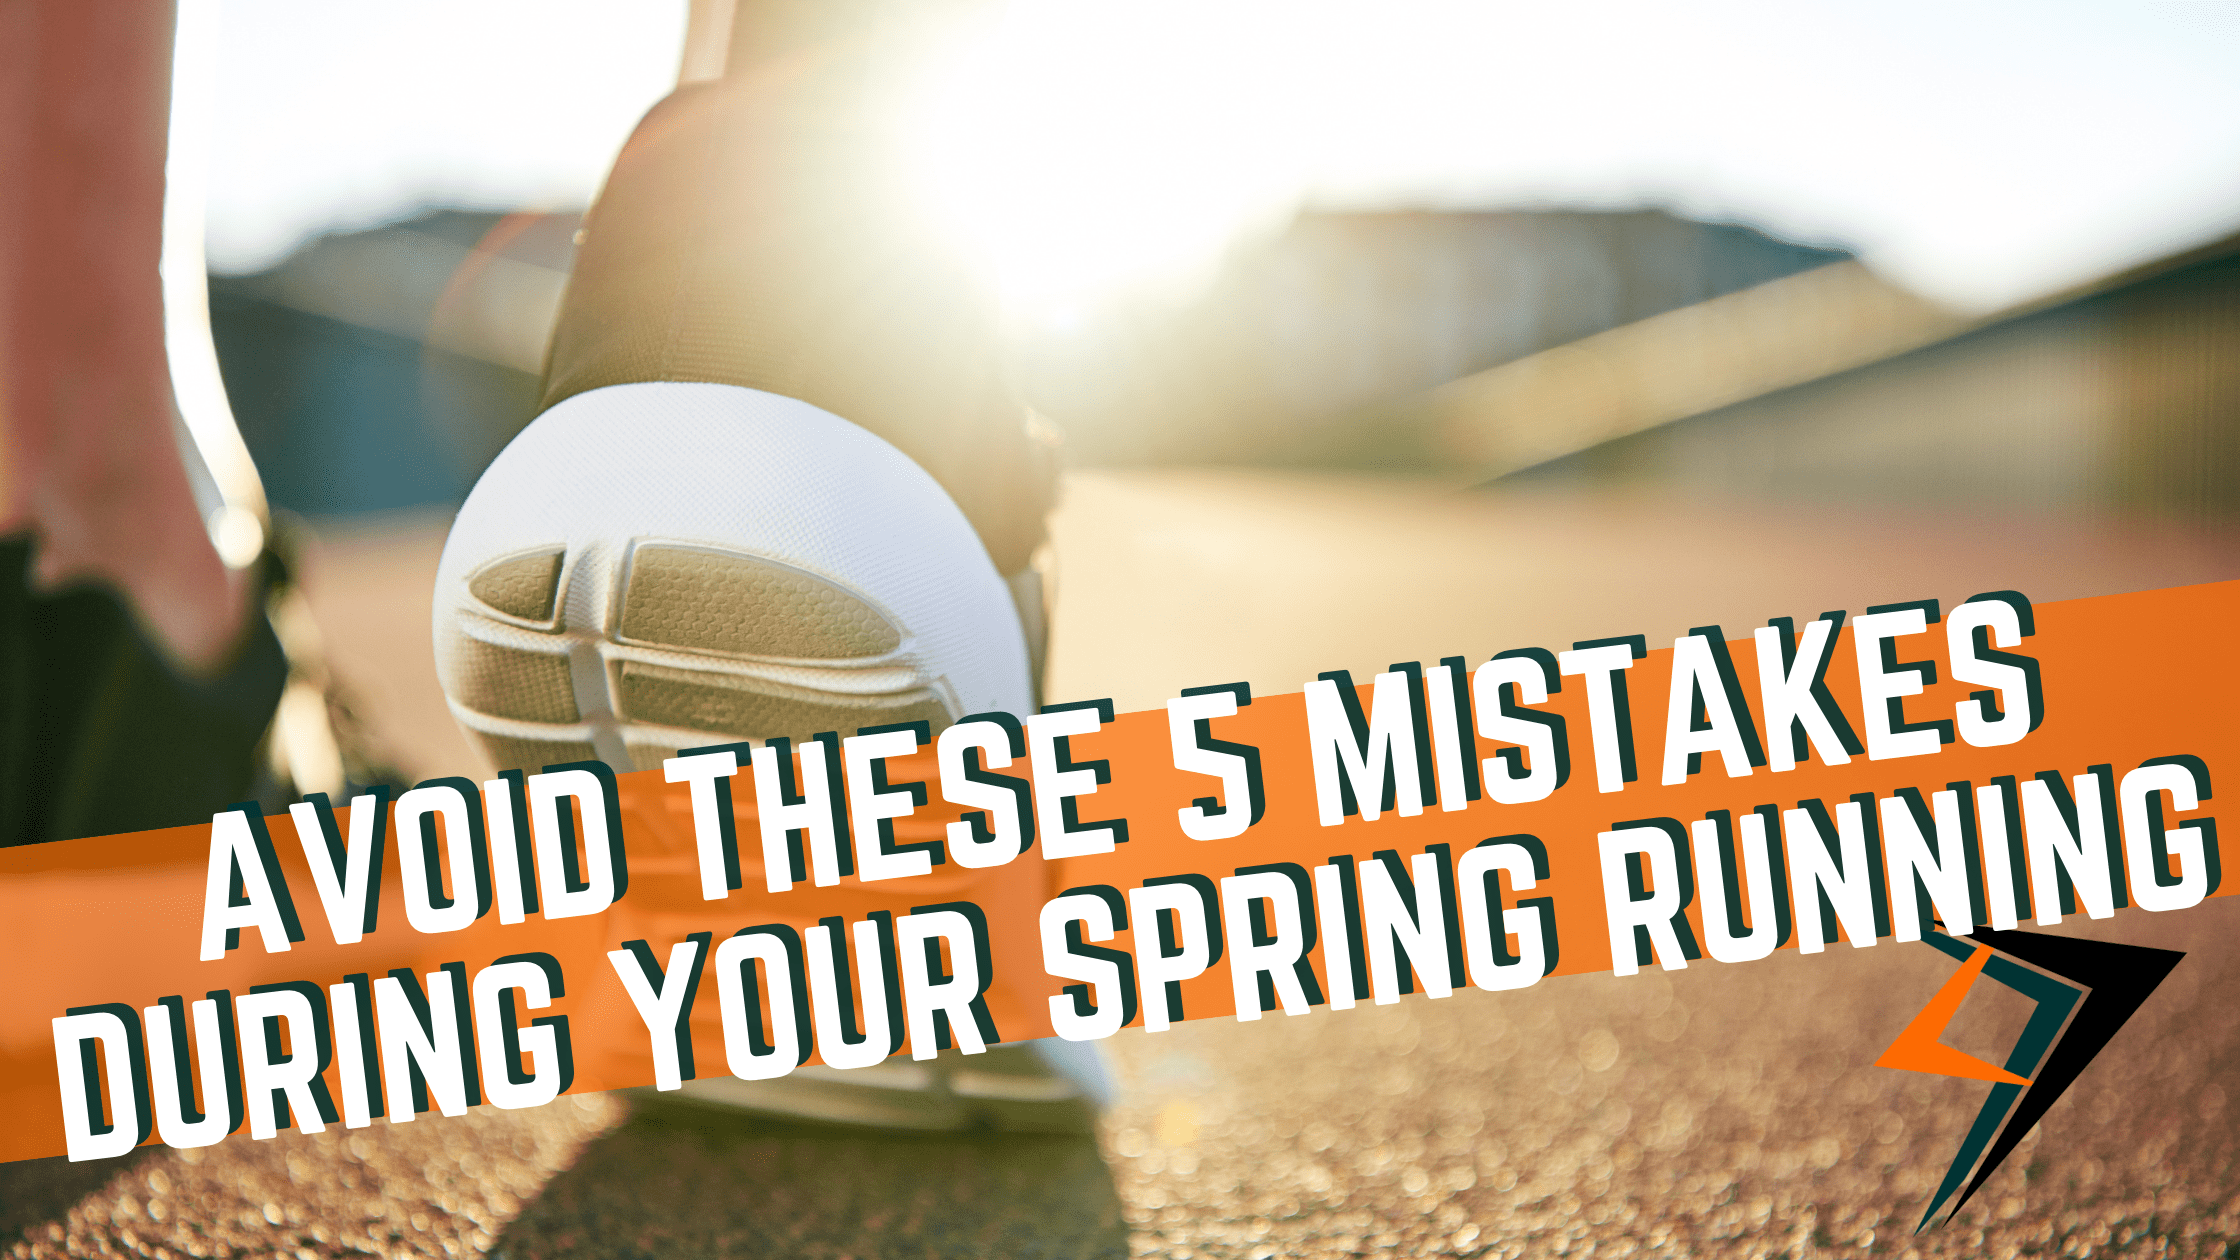 Avoid These 5 Mistakes During Your Spring Running